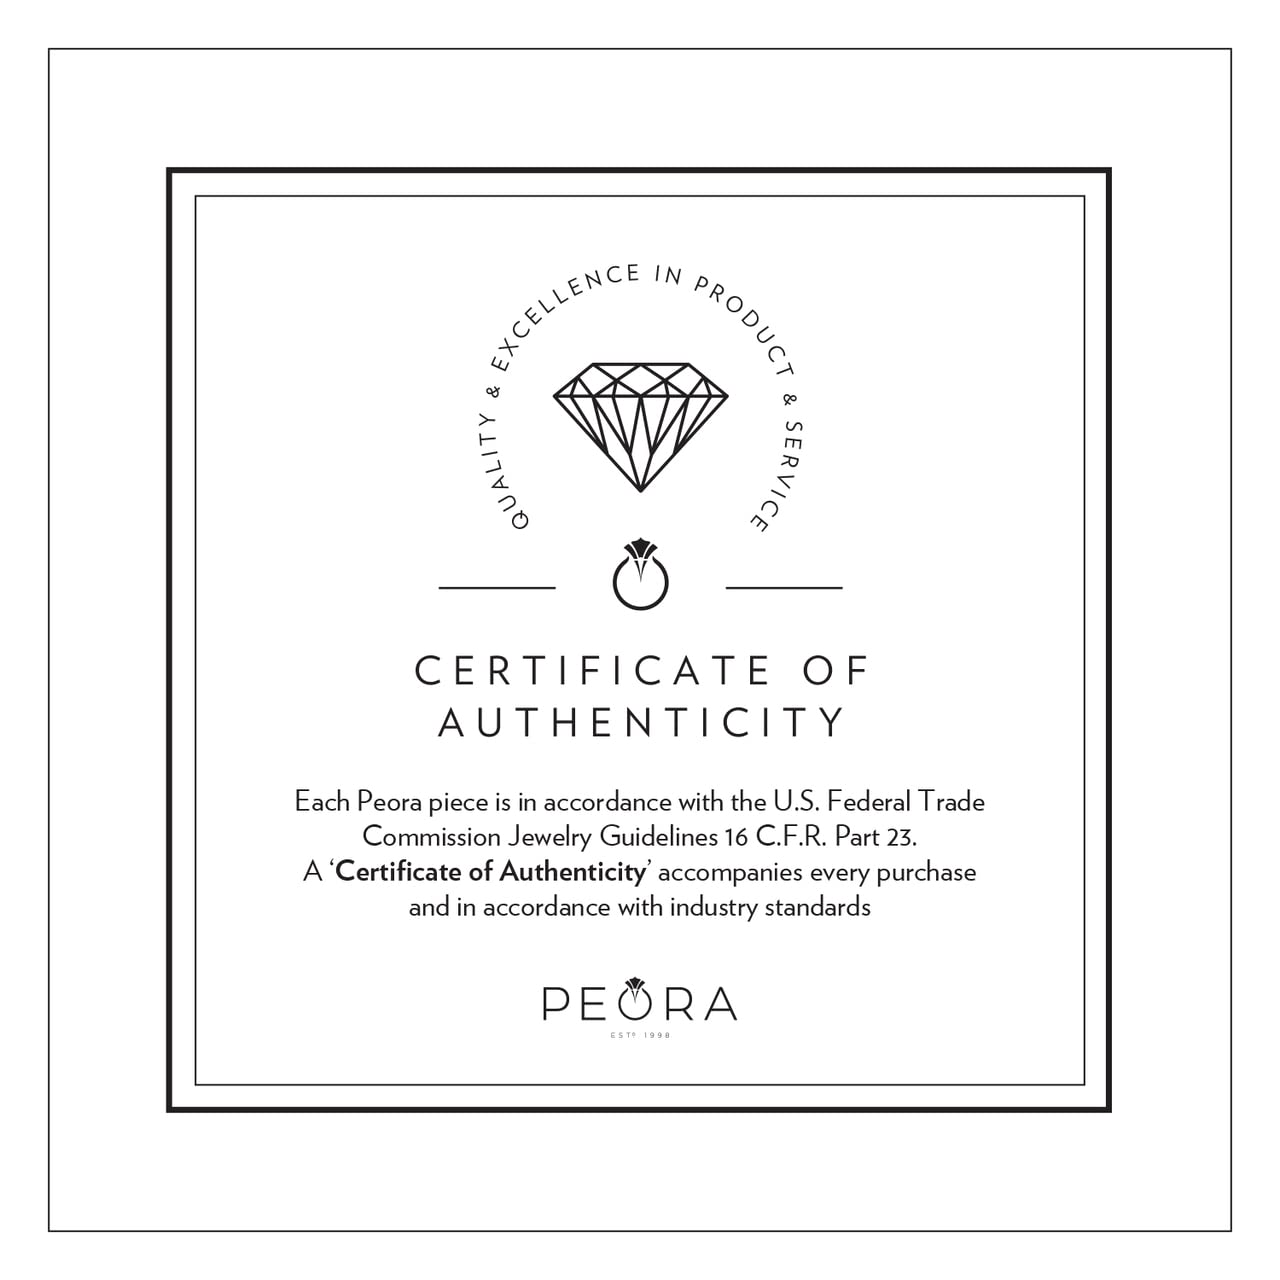 PEORA Men's Simulated Emerald Modern Signet Ring 925 Sterling Silver, 5.50 Carats Octagon Shape 11x9mm, Sizes 8 to 10